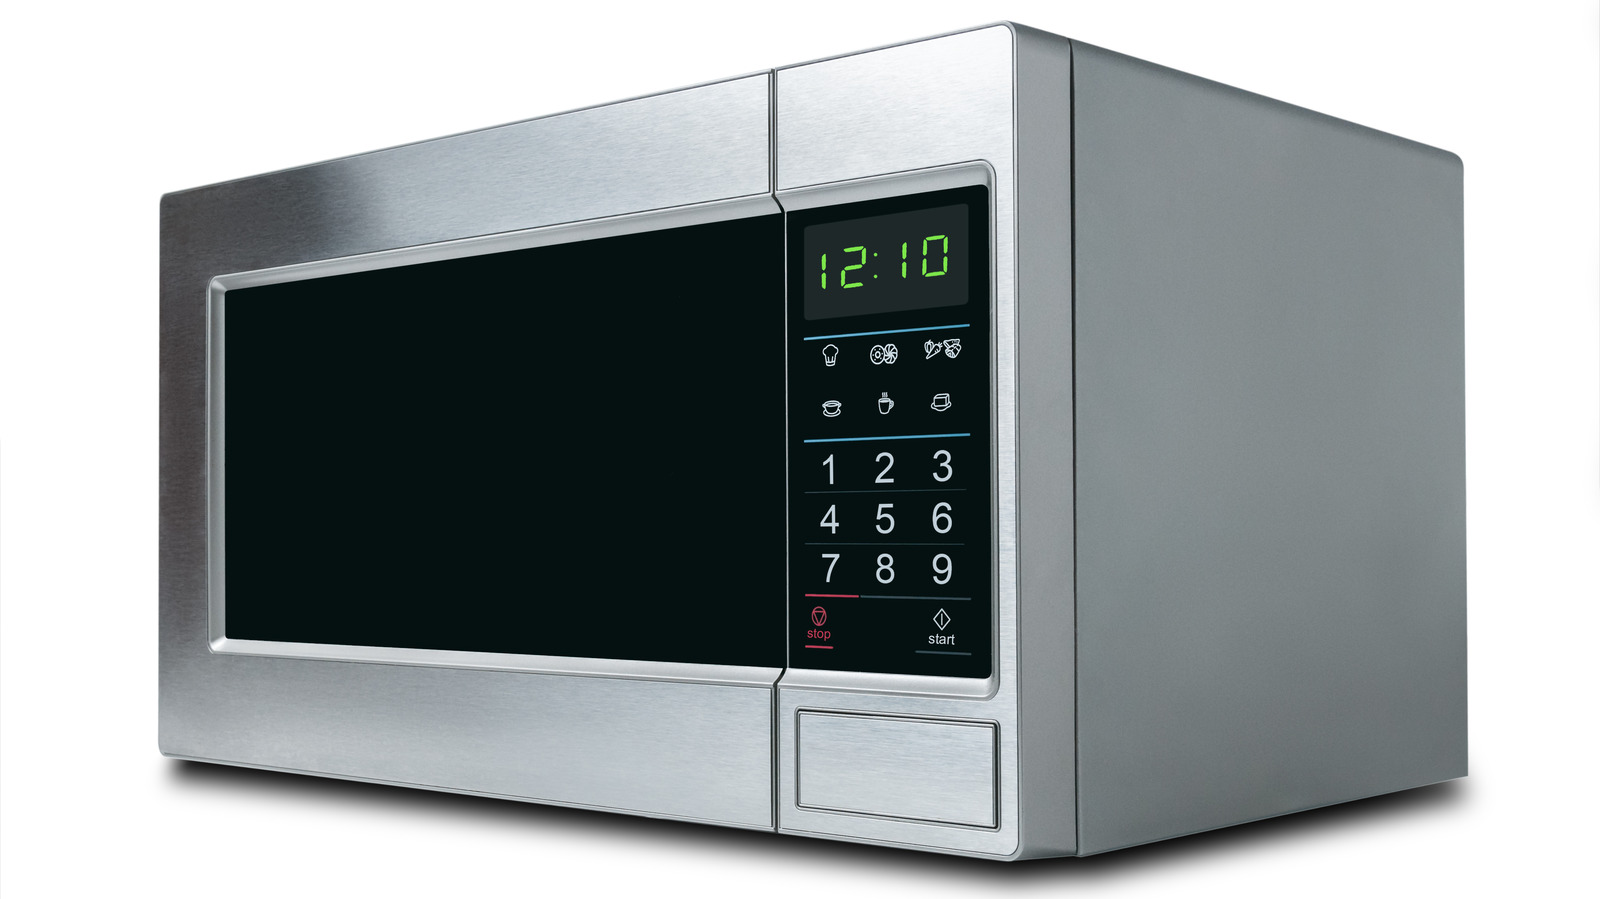 https://www.mashed.com/img/gallery/myths-about-microwaves-you-need-to-stop-believing/l-intro-1614886792.jpg